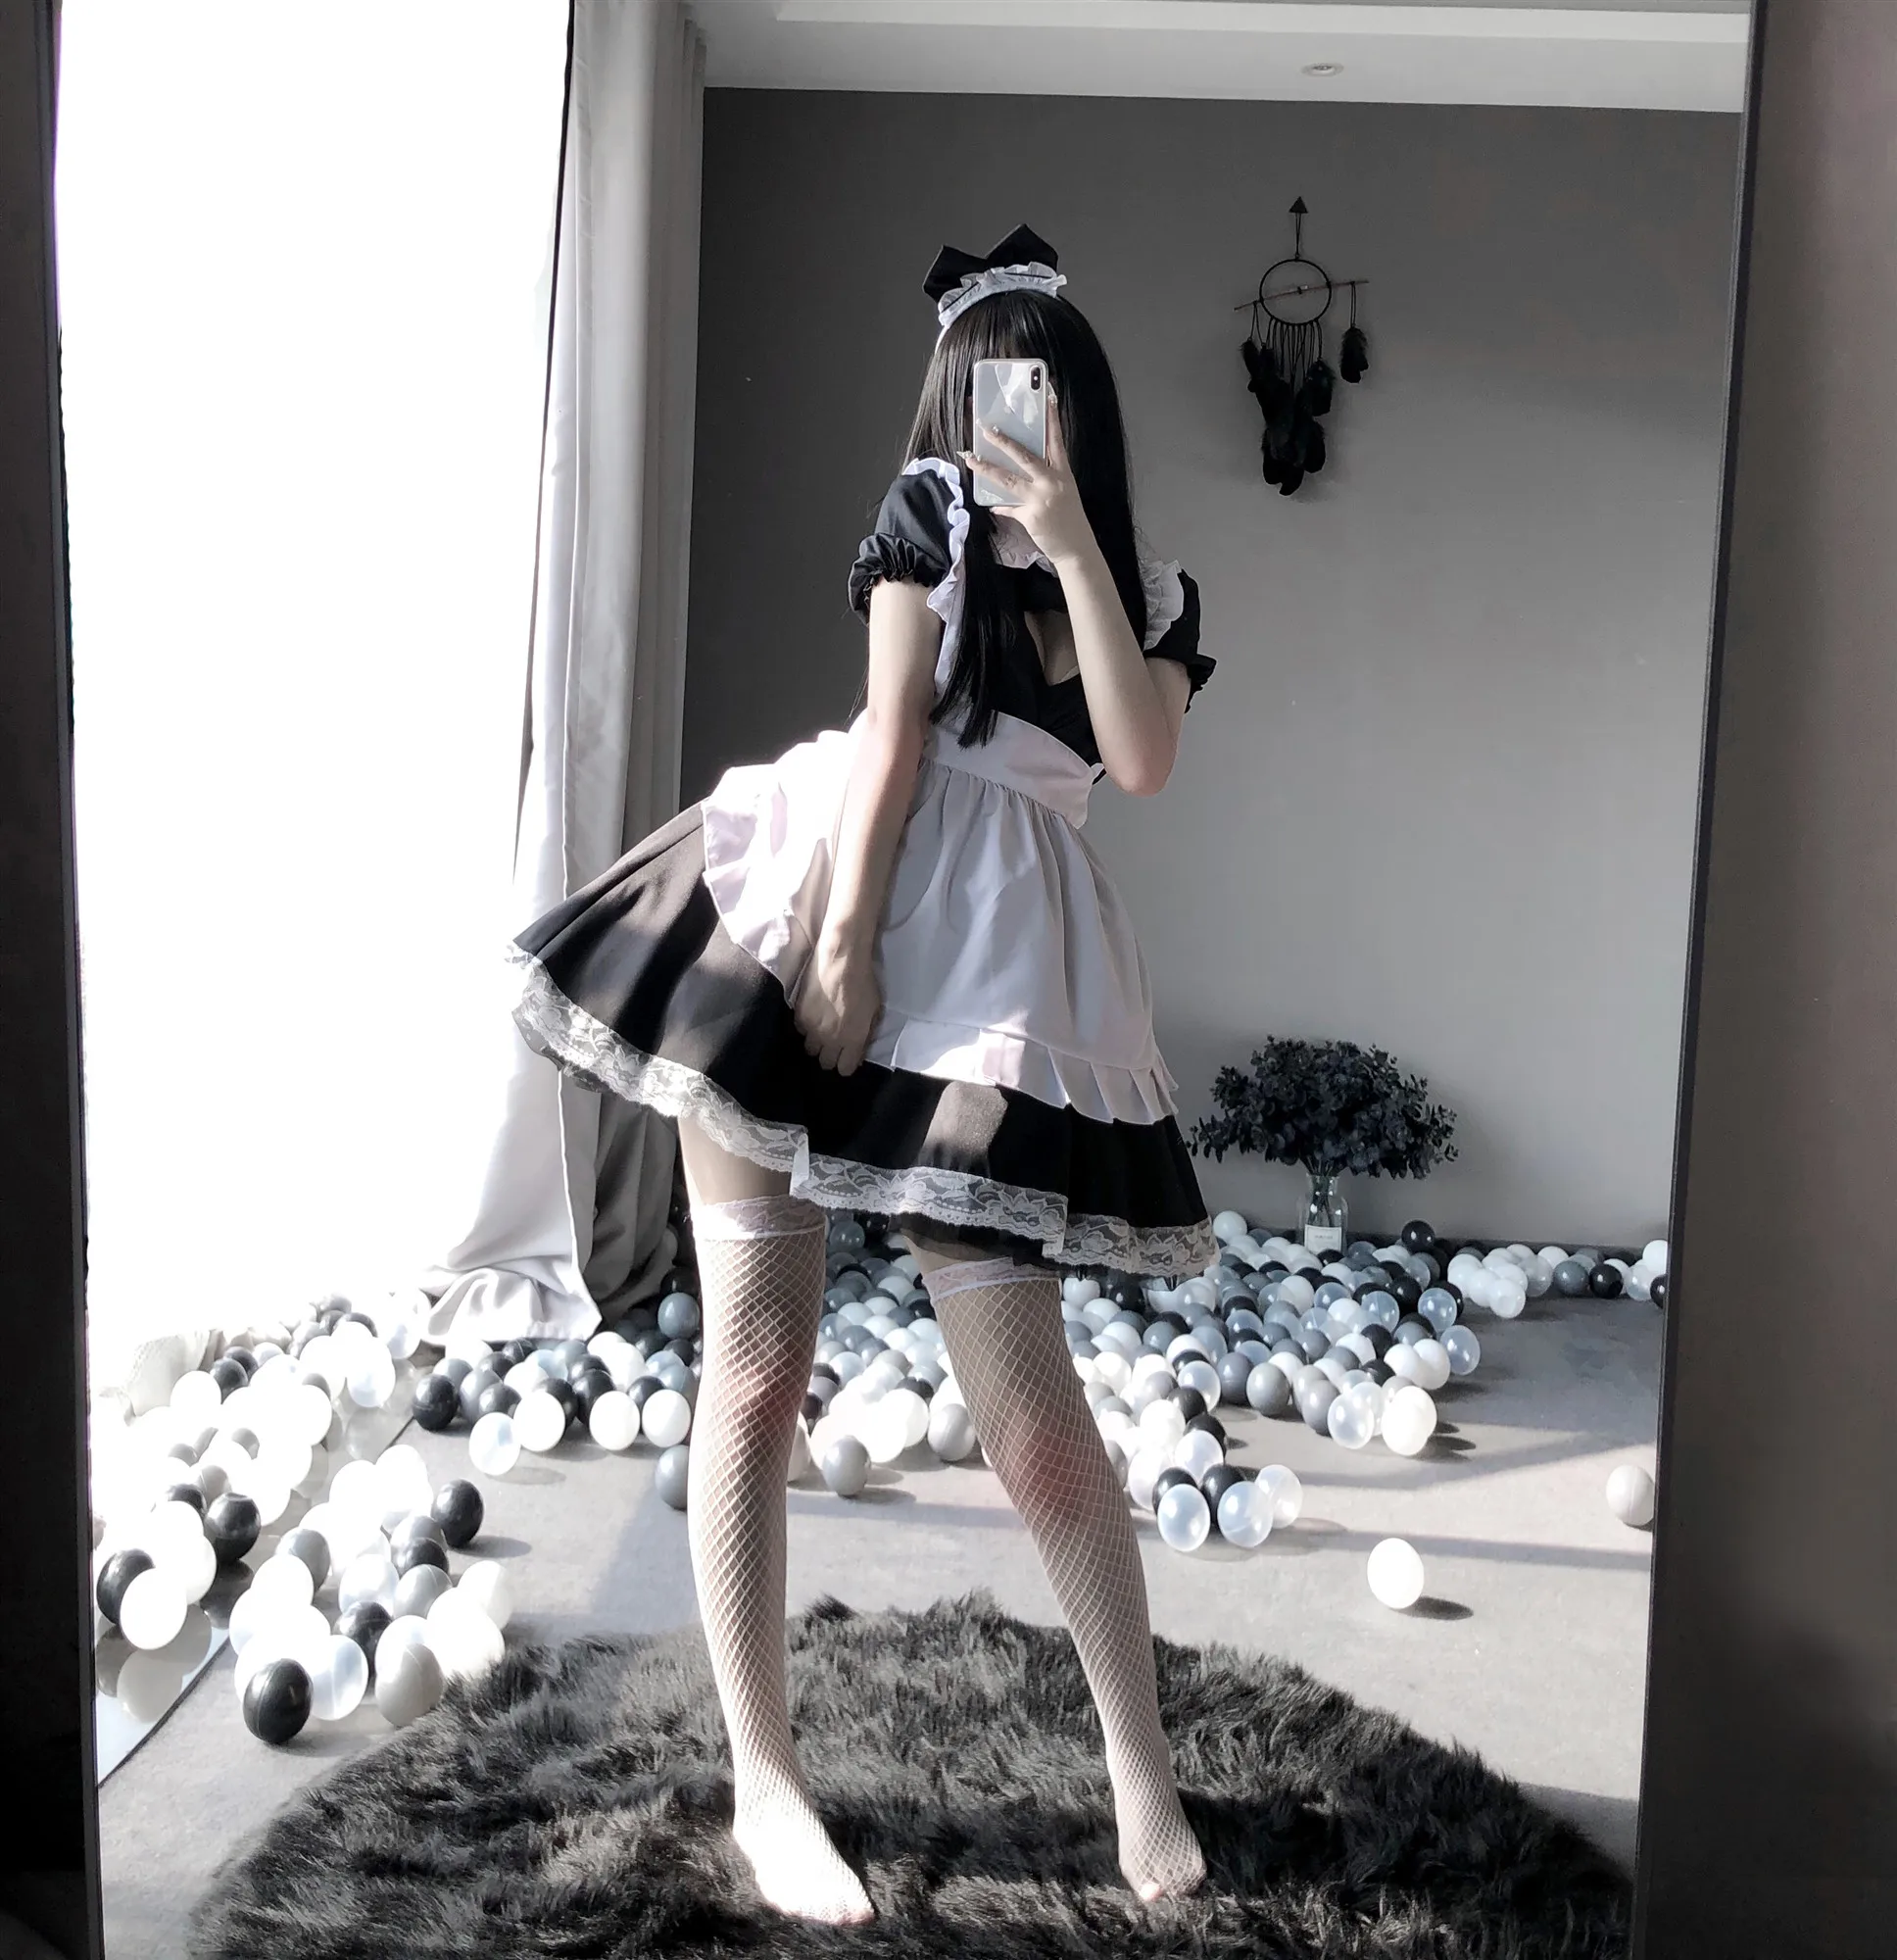 

Sexy Maid Outfit for Women Cosplay Costumes Lolita Dress Anime Lingerie Uniform Temptation Roleplay Halloween CostumeErotic Porn